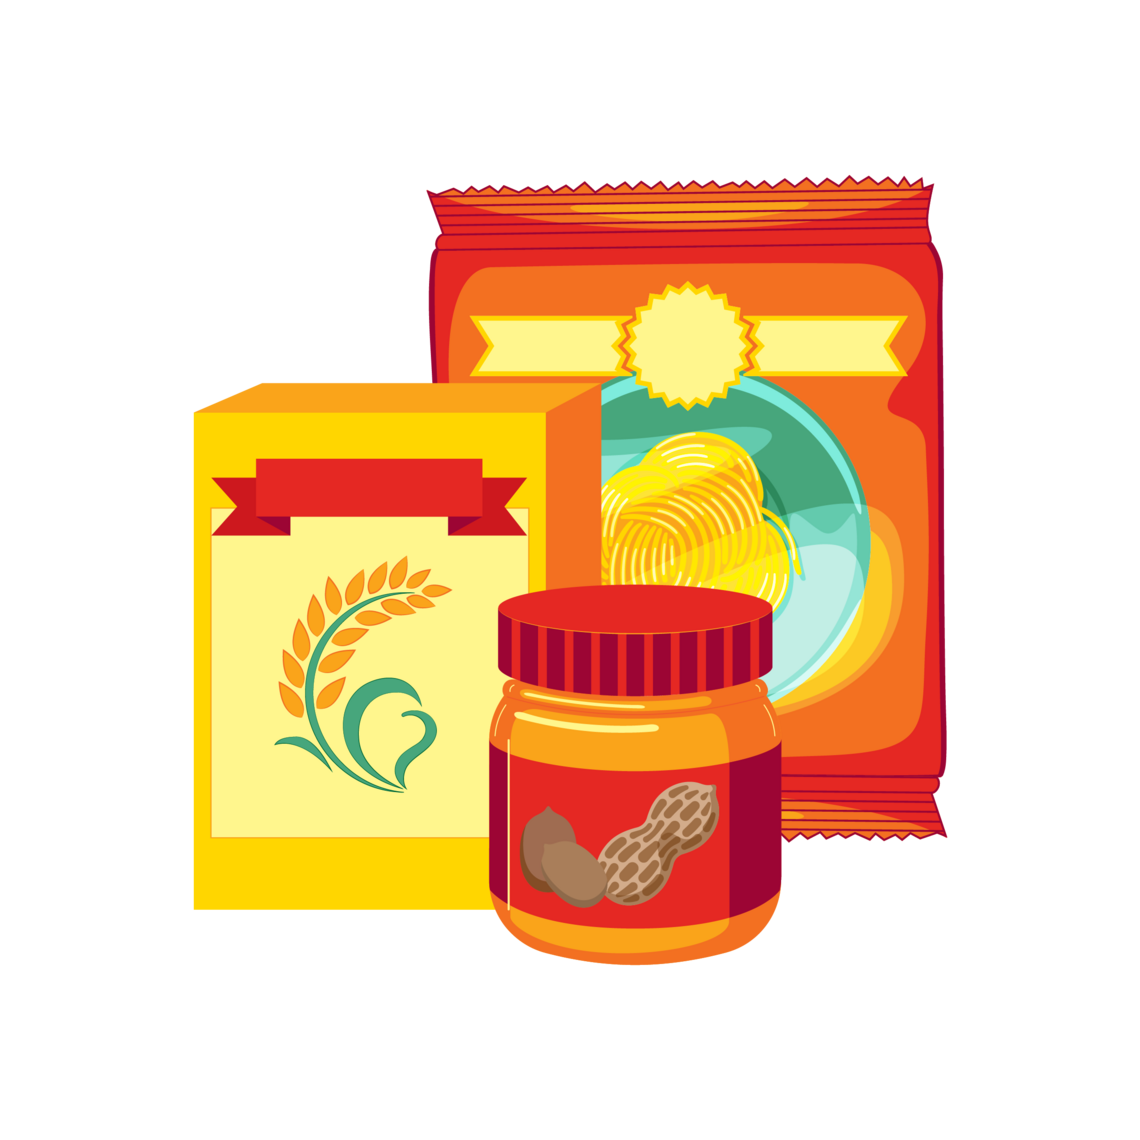 Illustration of packaged food items